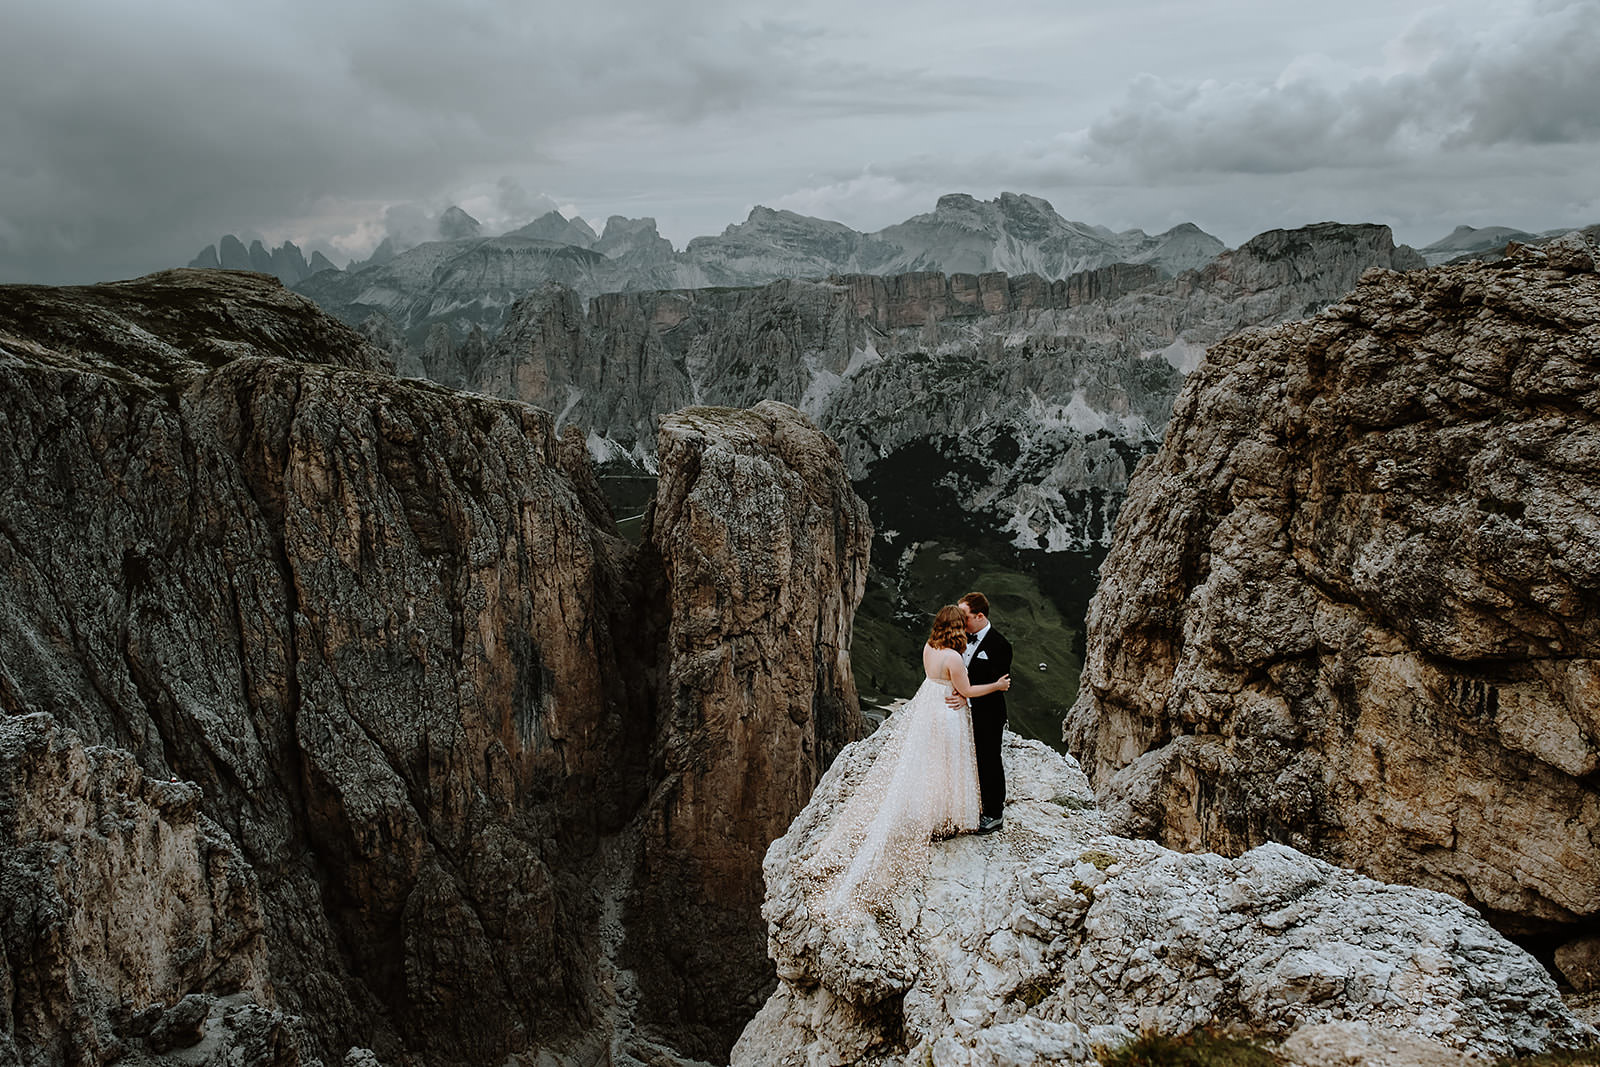 Bride and groom in wedding clothes standing on the edge of a mountain after their mountain wedding ceremony in Italy